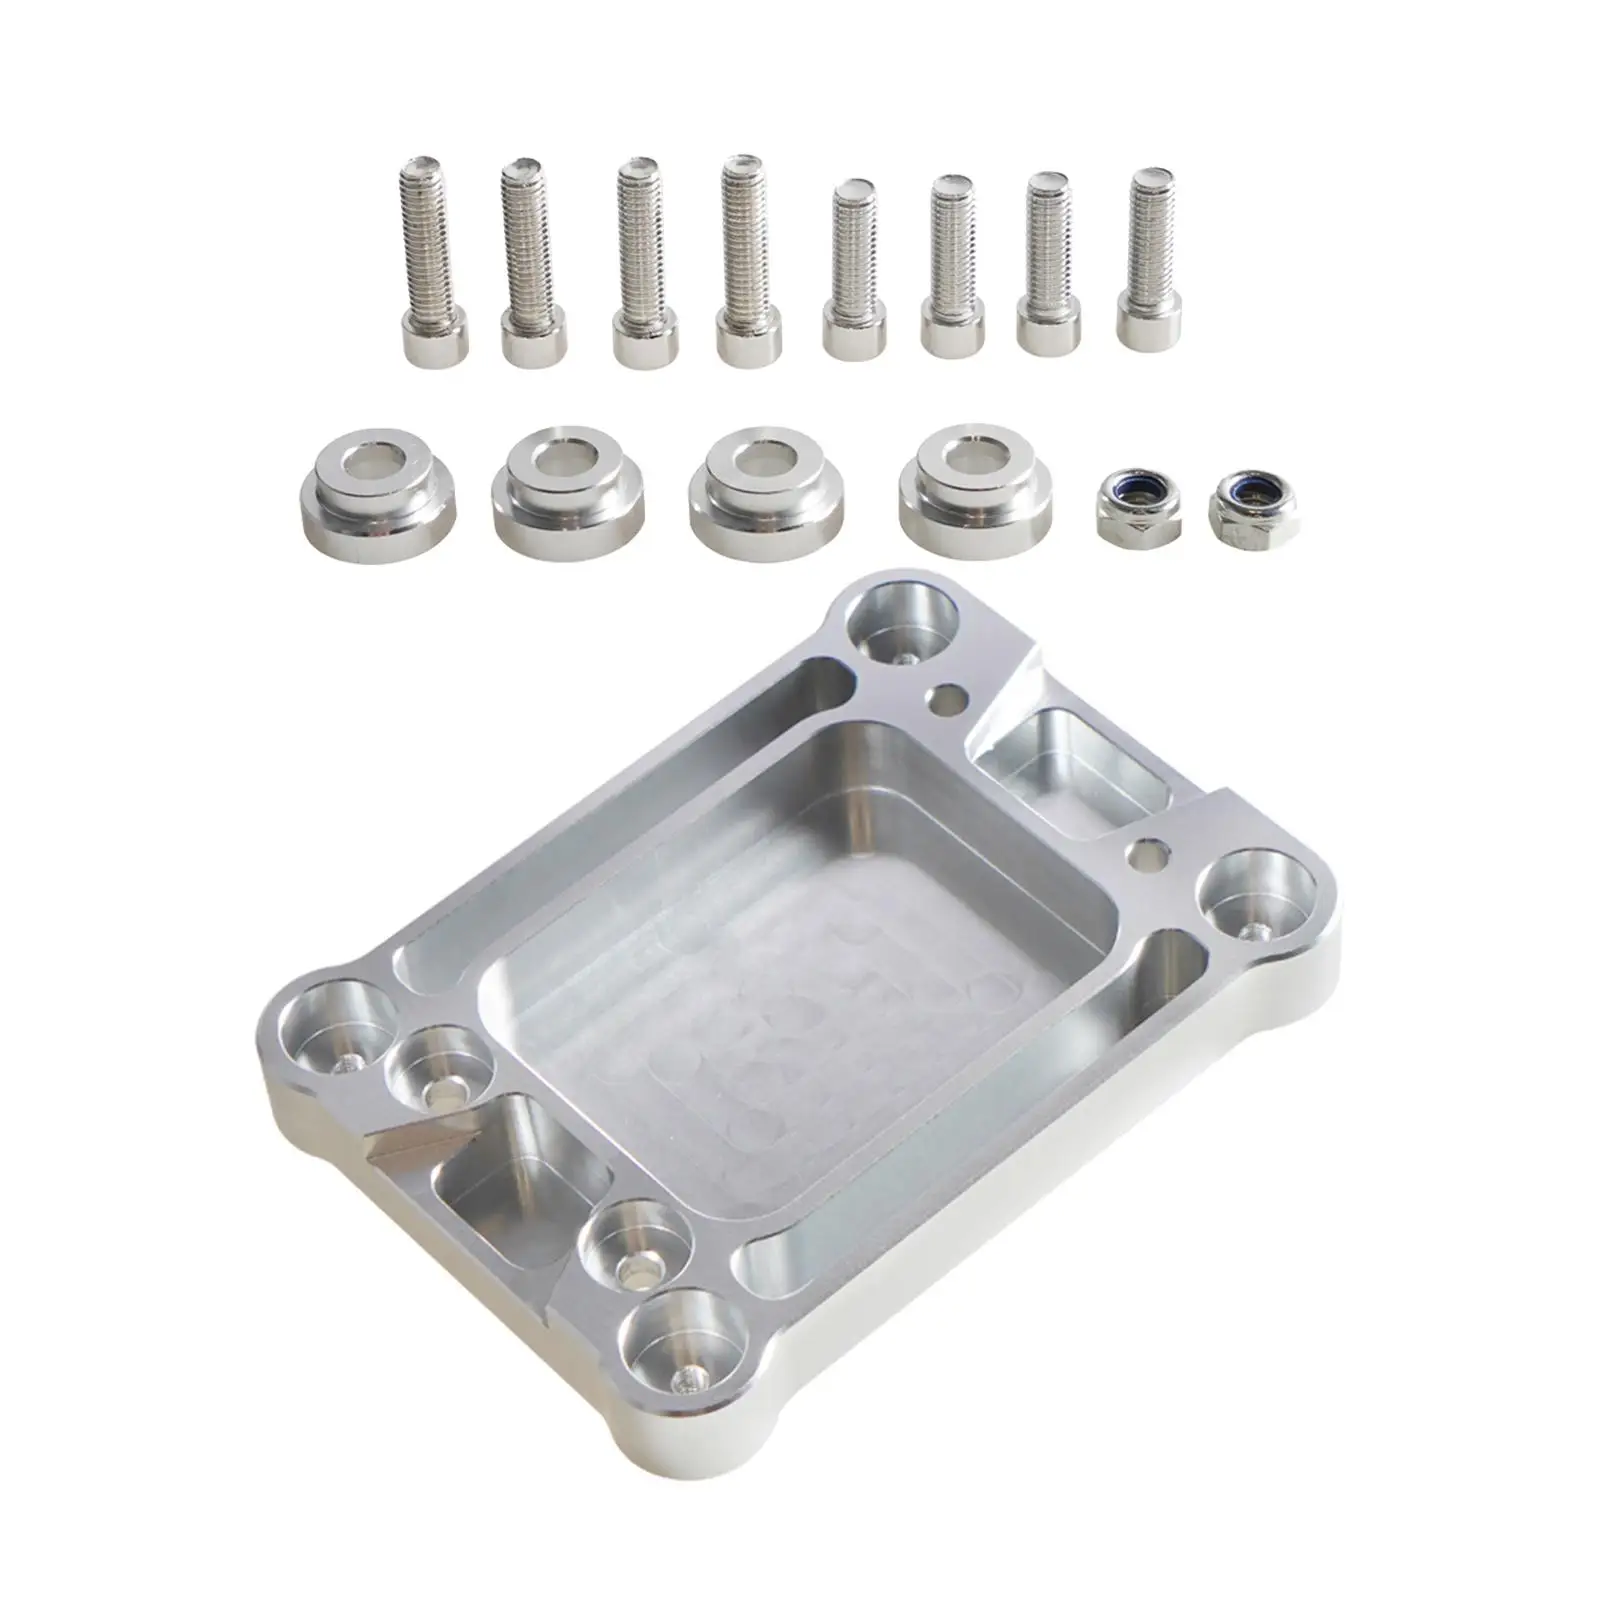 Billet Shifter Box Base Plate Professional for Acura Integra 1994-2001